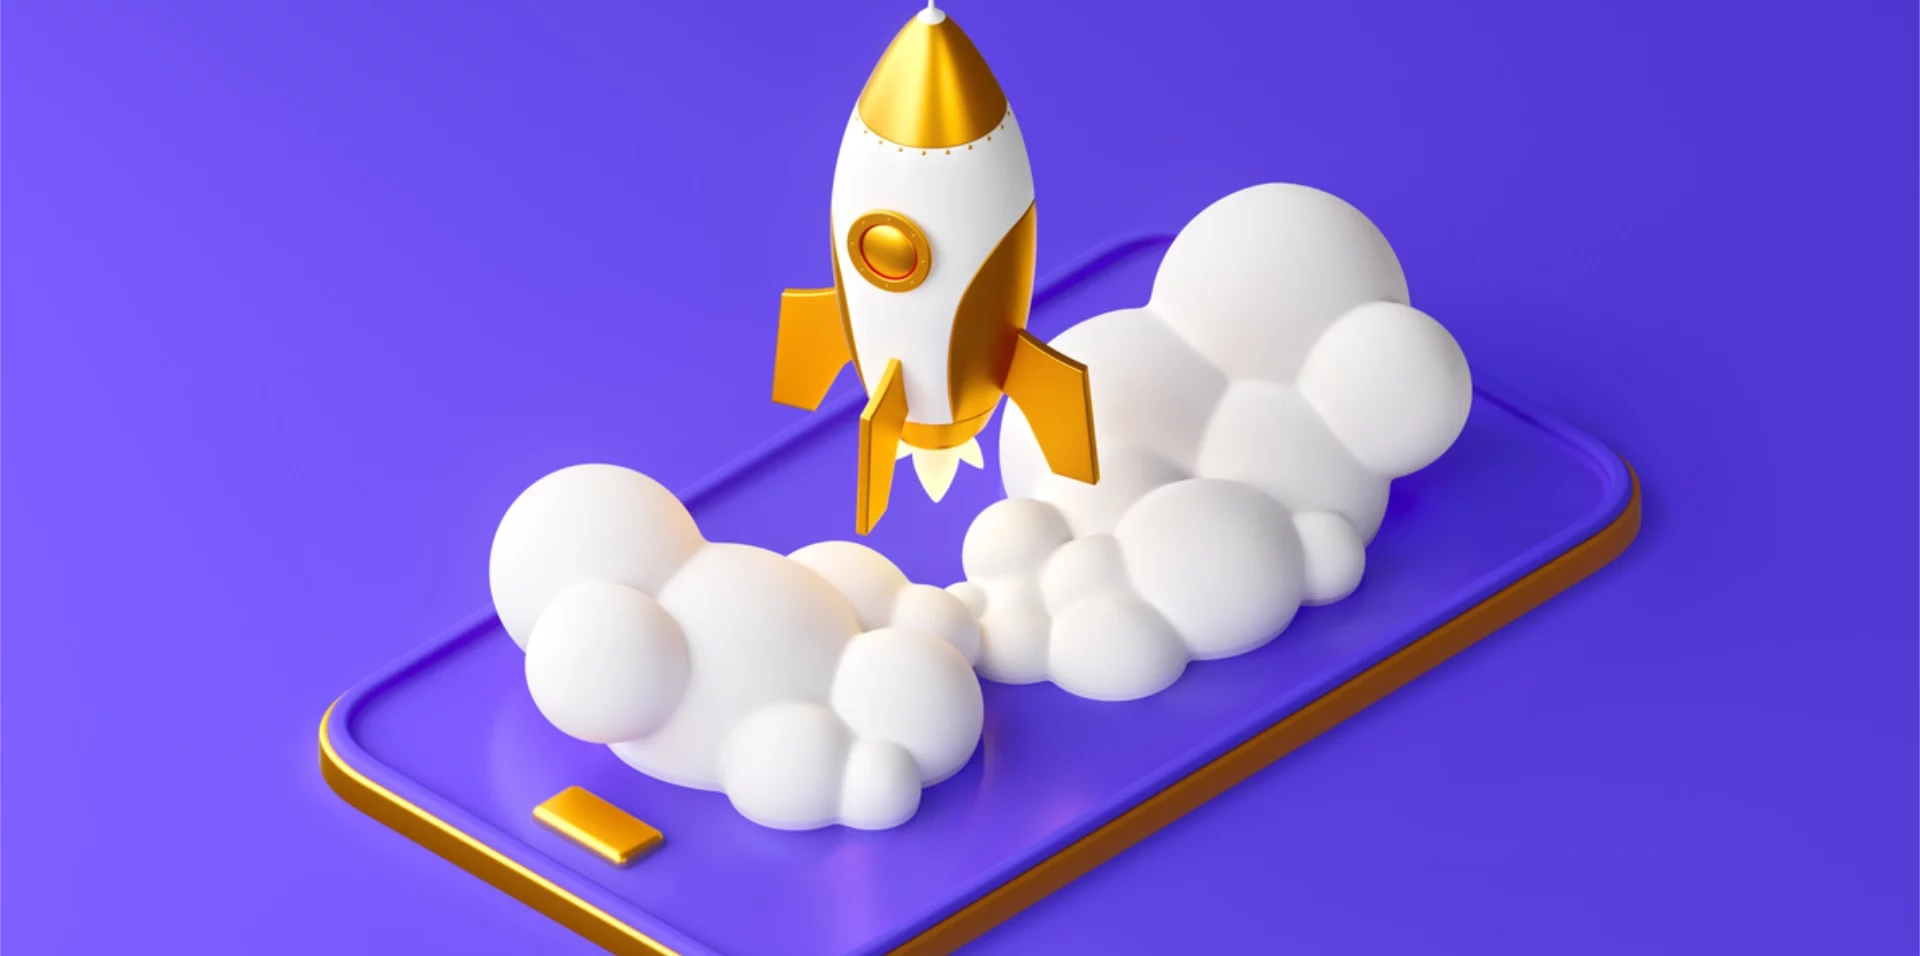 Gold and white rocket taking off out of a mobile phone with purple background